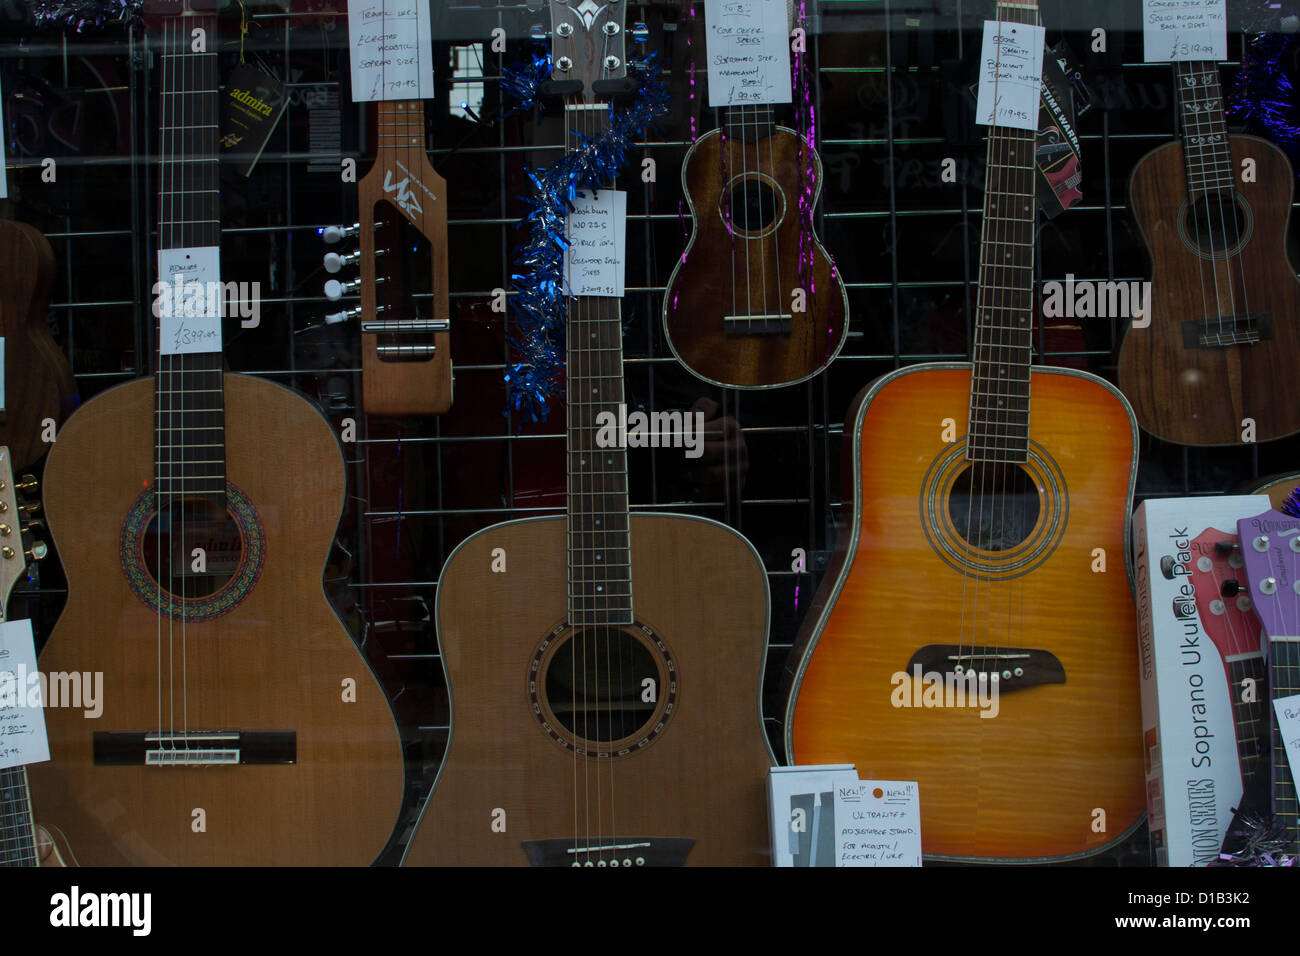 Guitars in a shop window of a music store Stock Photo